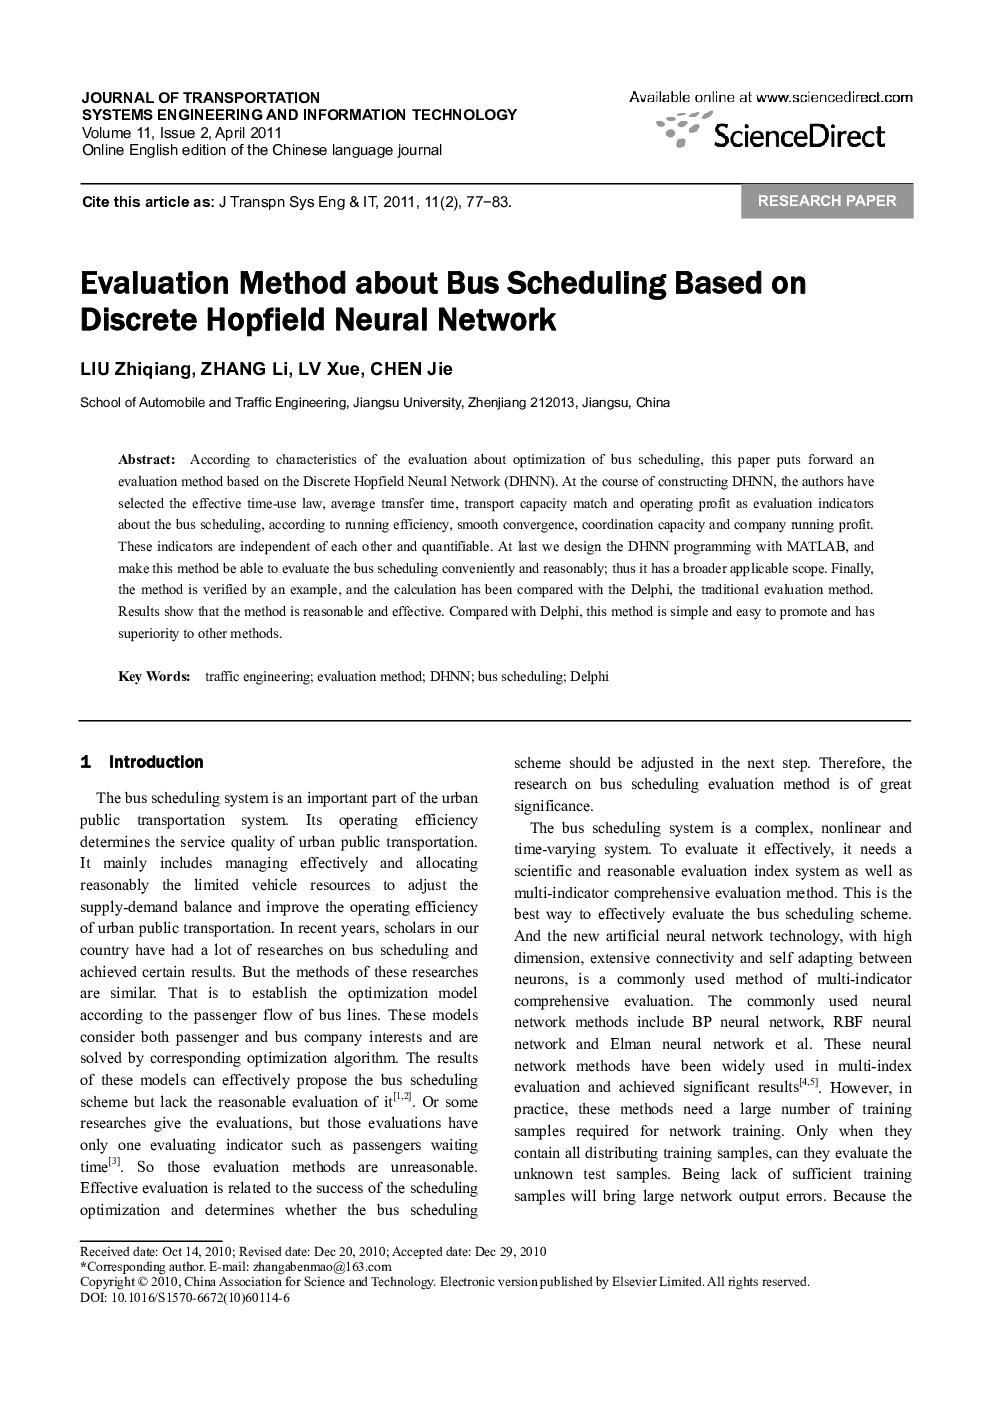 Evaluation Method about Bus Scheduling Based on Discrete Hopfield Neural Network